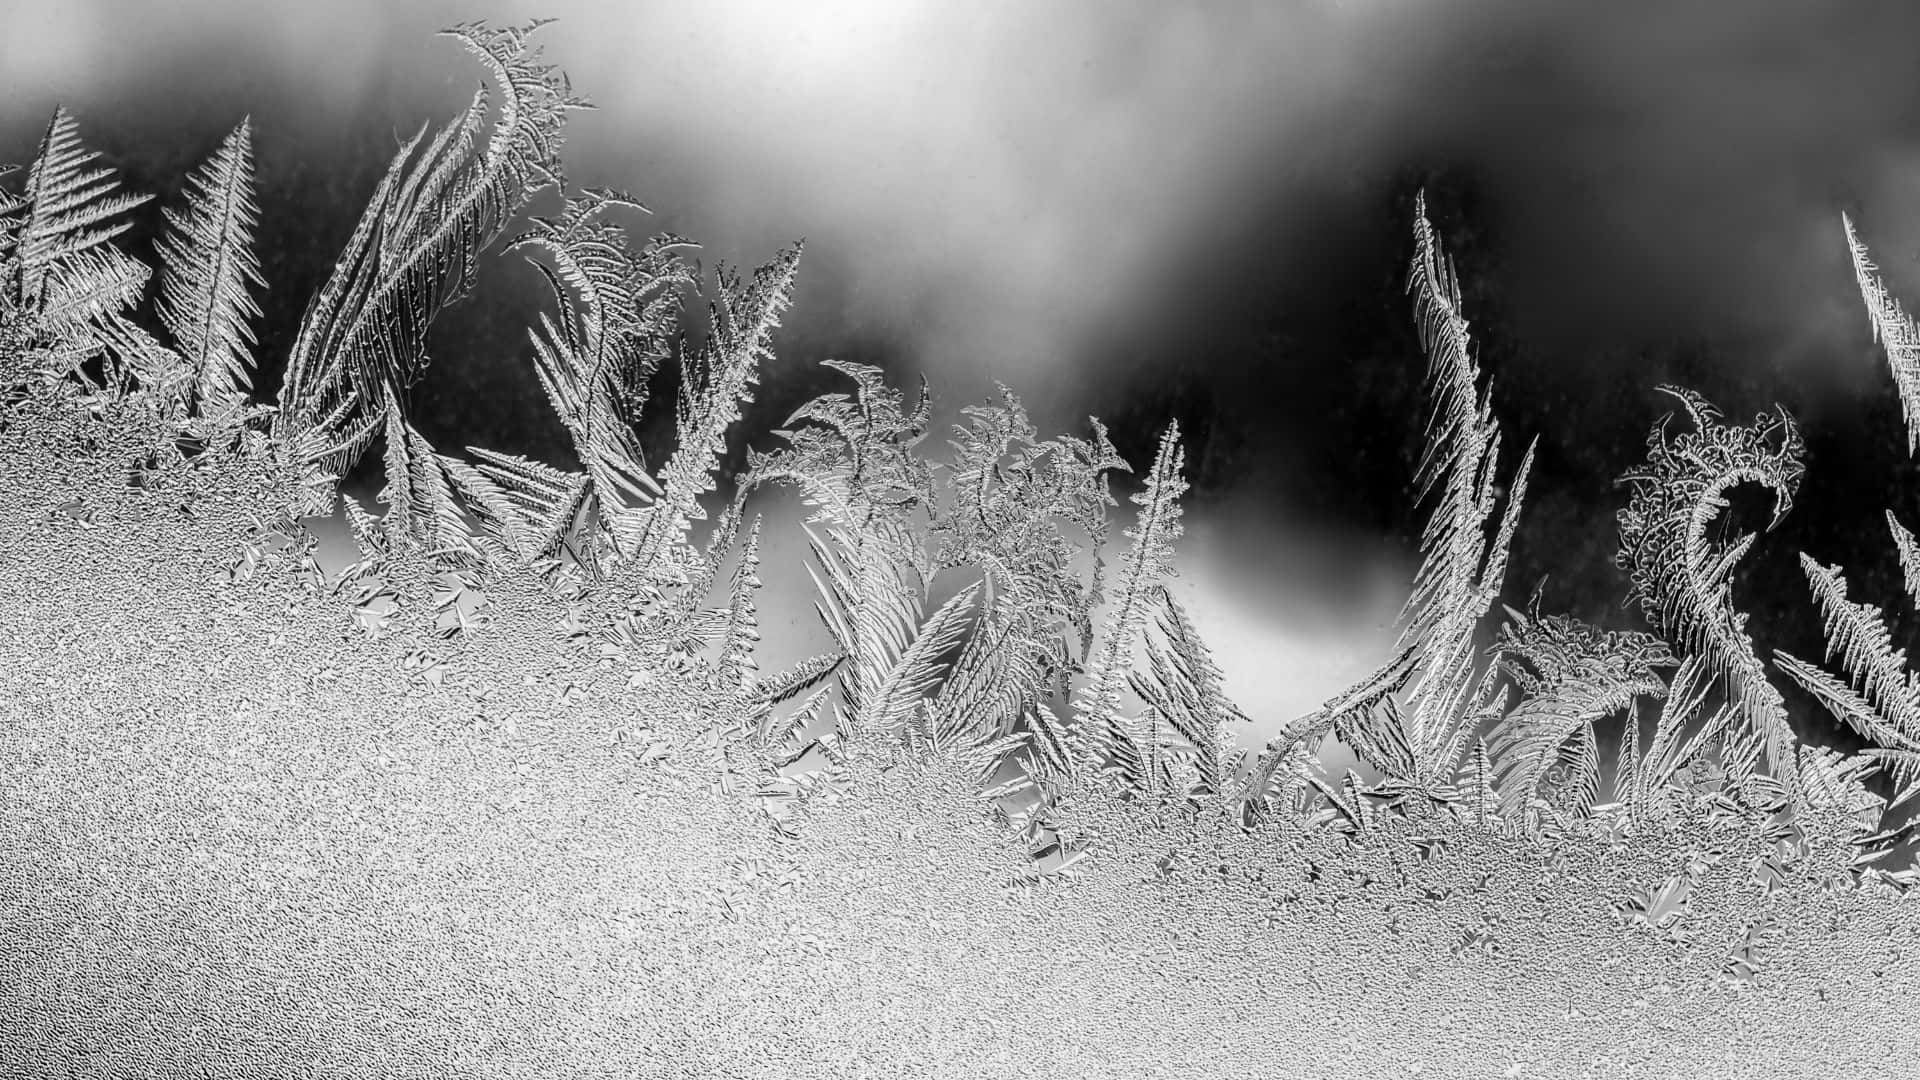 Morning Frost on a Wintry Background